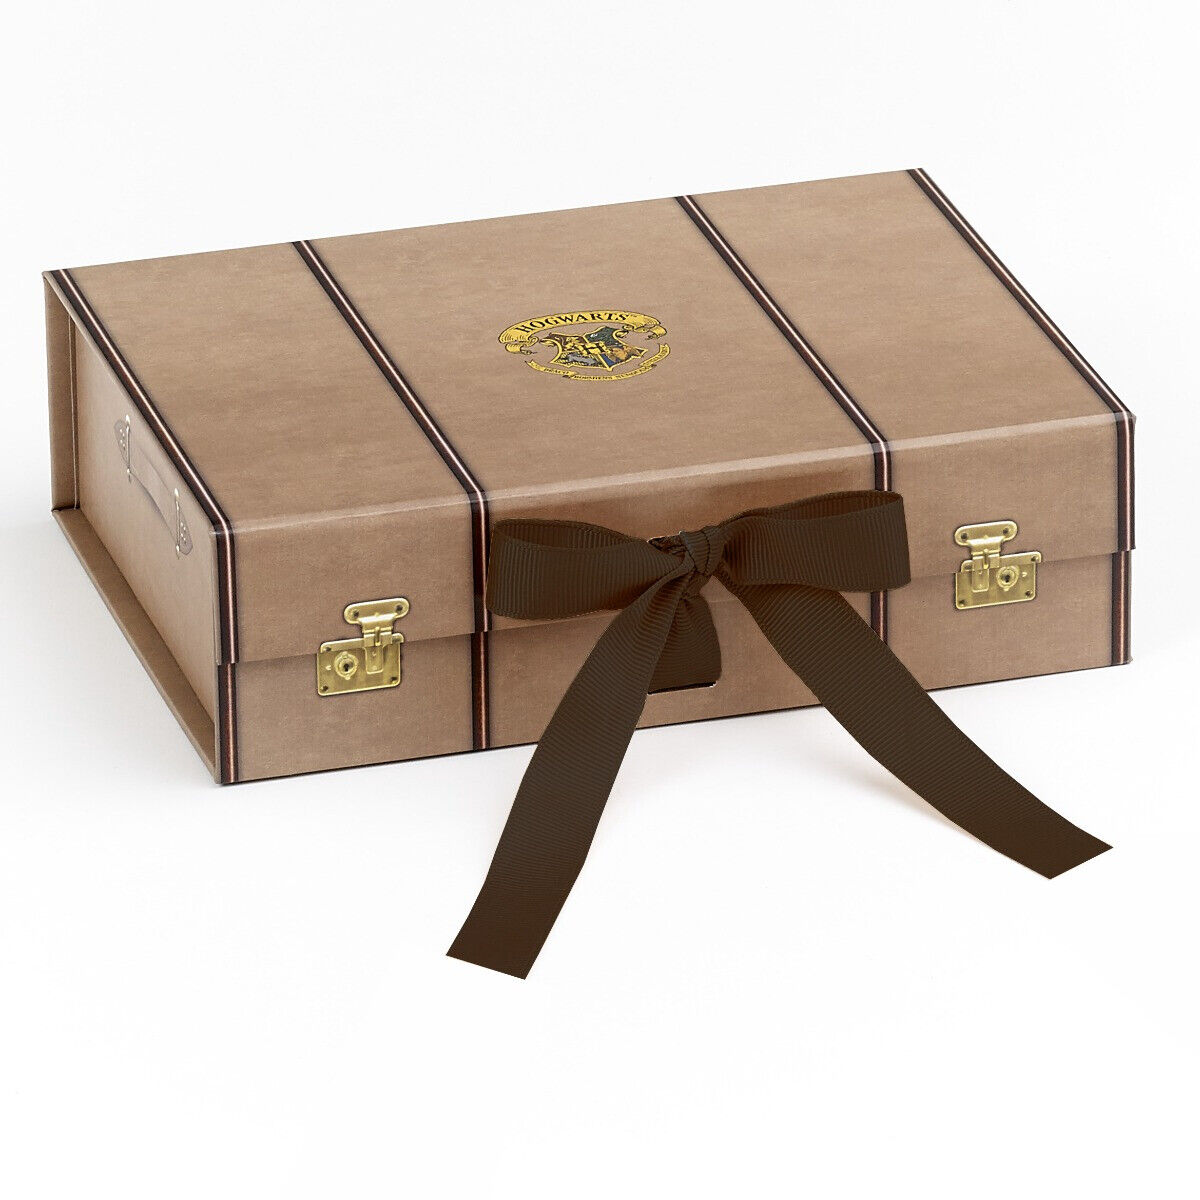 Official Harry Potter Trunk Gift Box Available in 3 Sizes